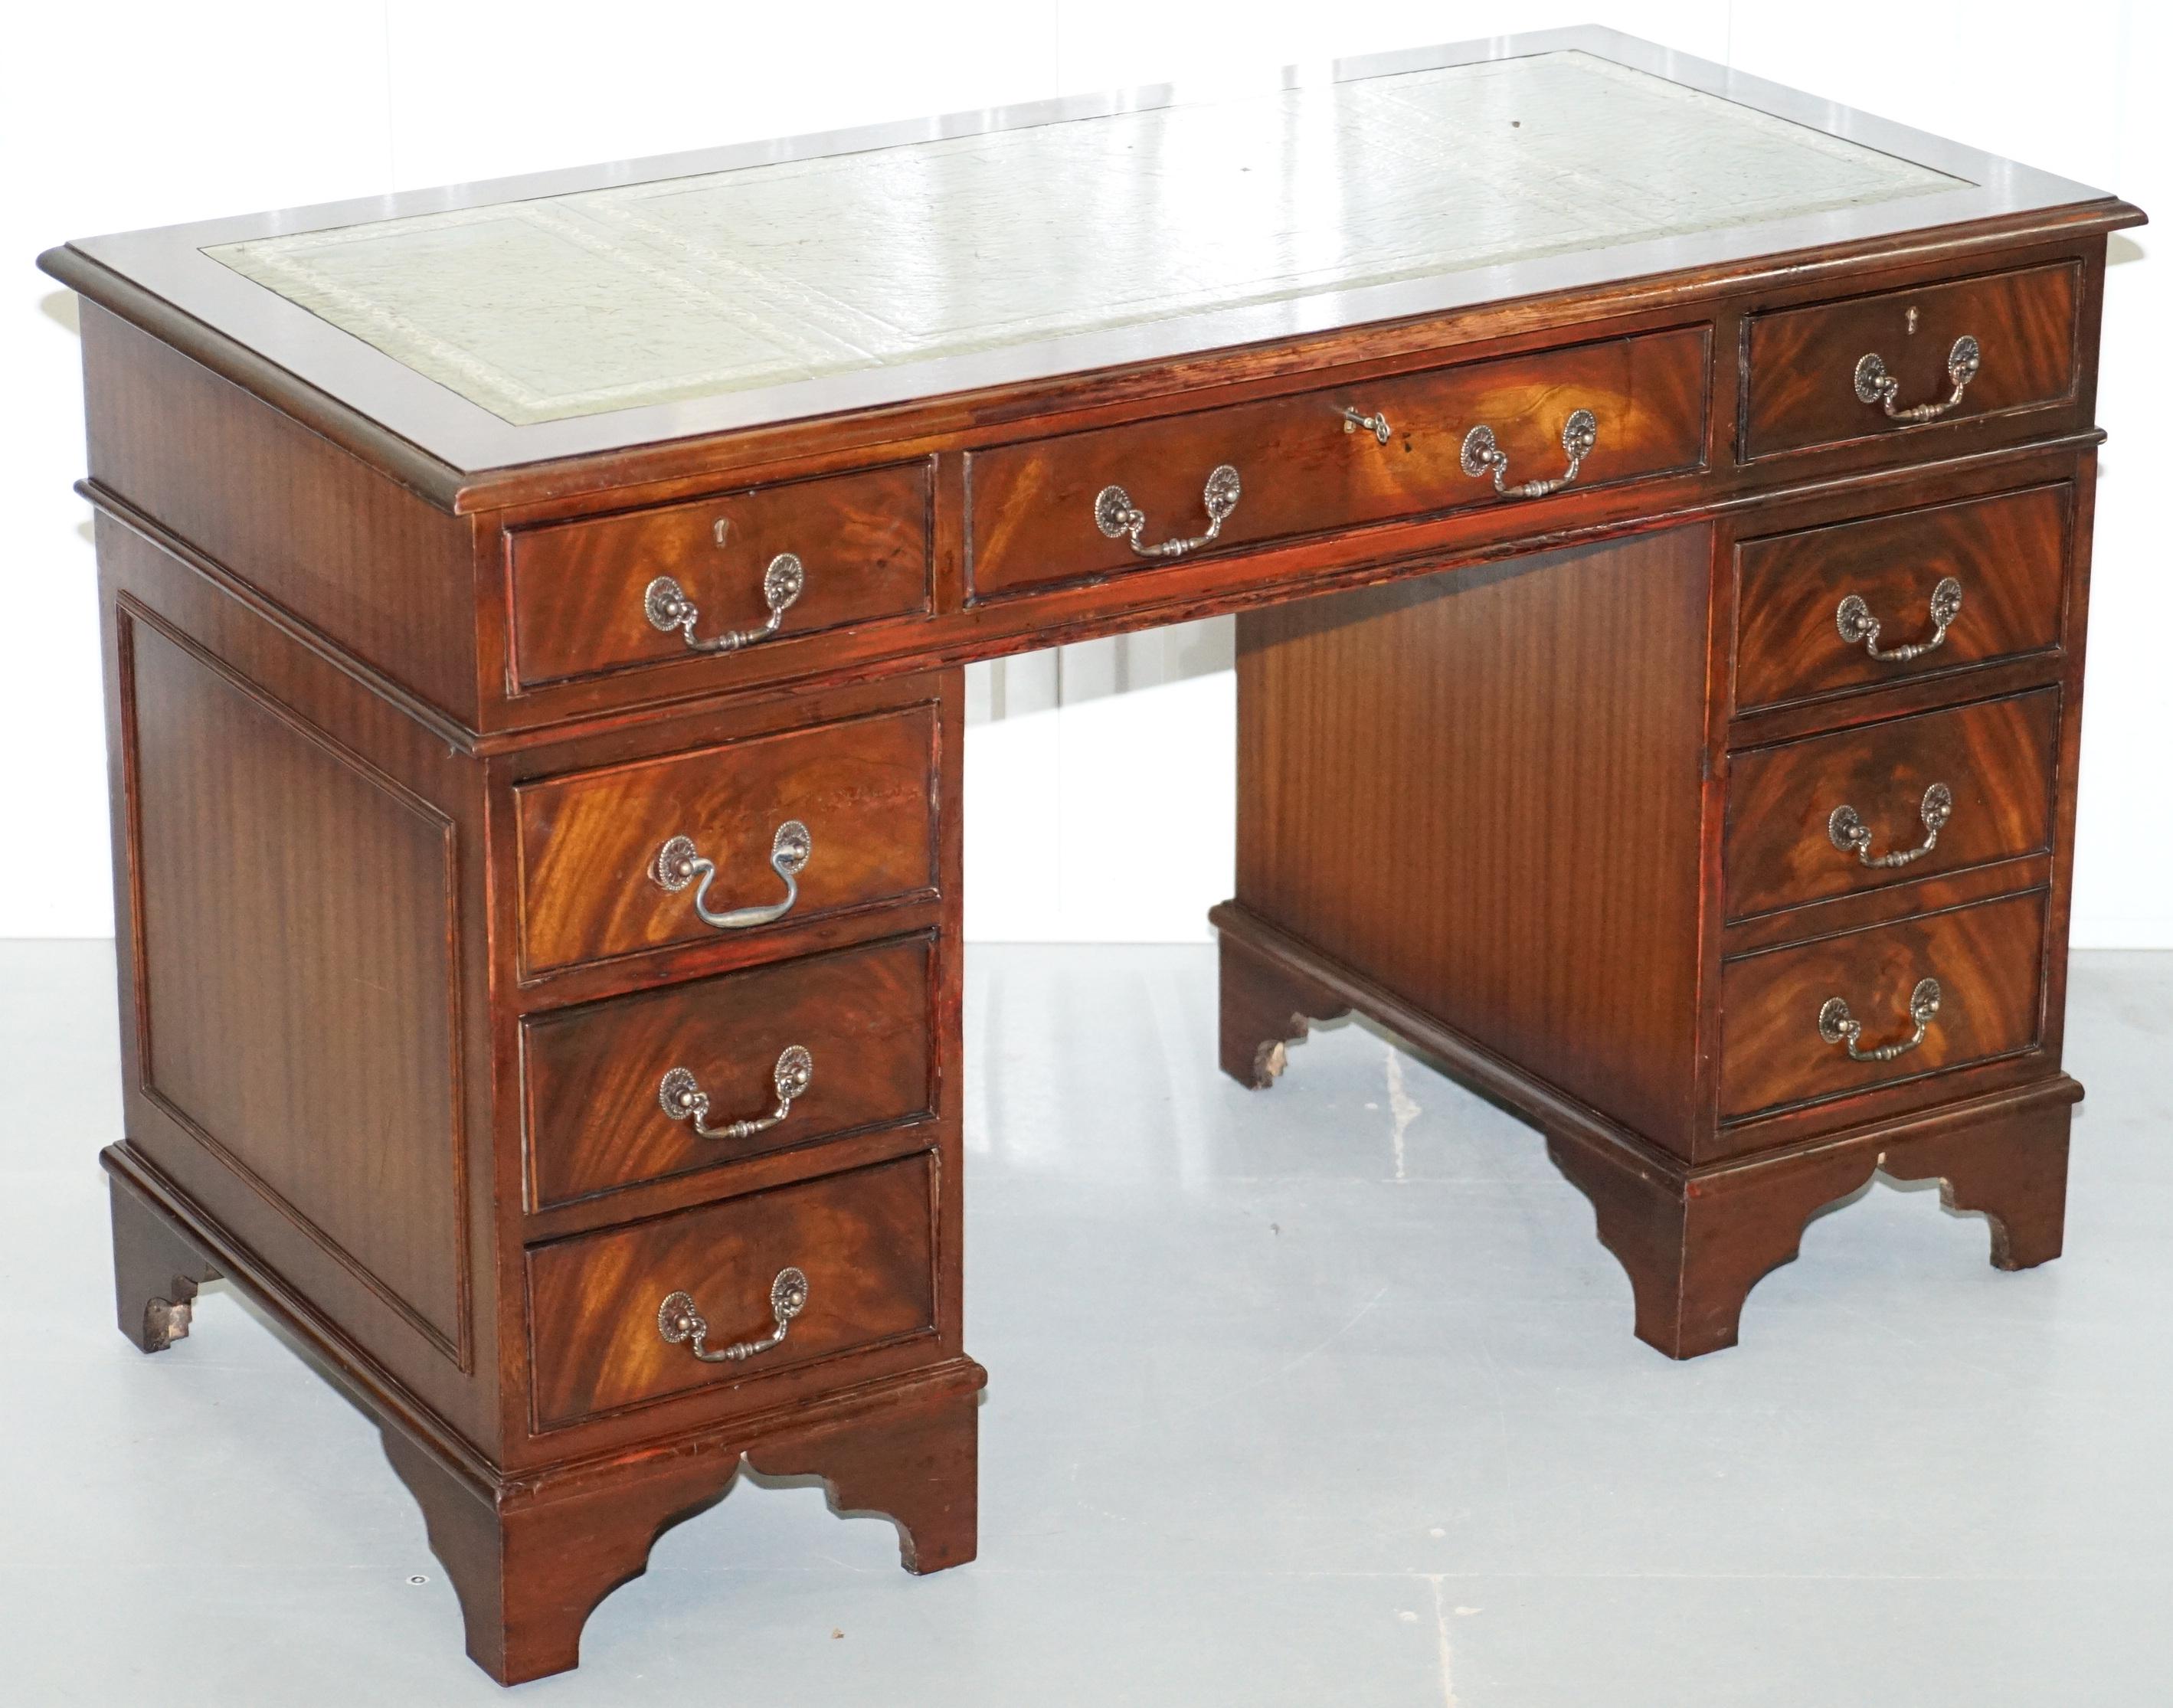 We are delighted to offer for sale this lovely flamed Mahogany with green leather writing surface twin pedestal partner desk

Please note the delivery fee listed is just a guide, it covers within the M25 only

This desk has the tradition drawer